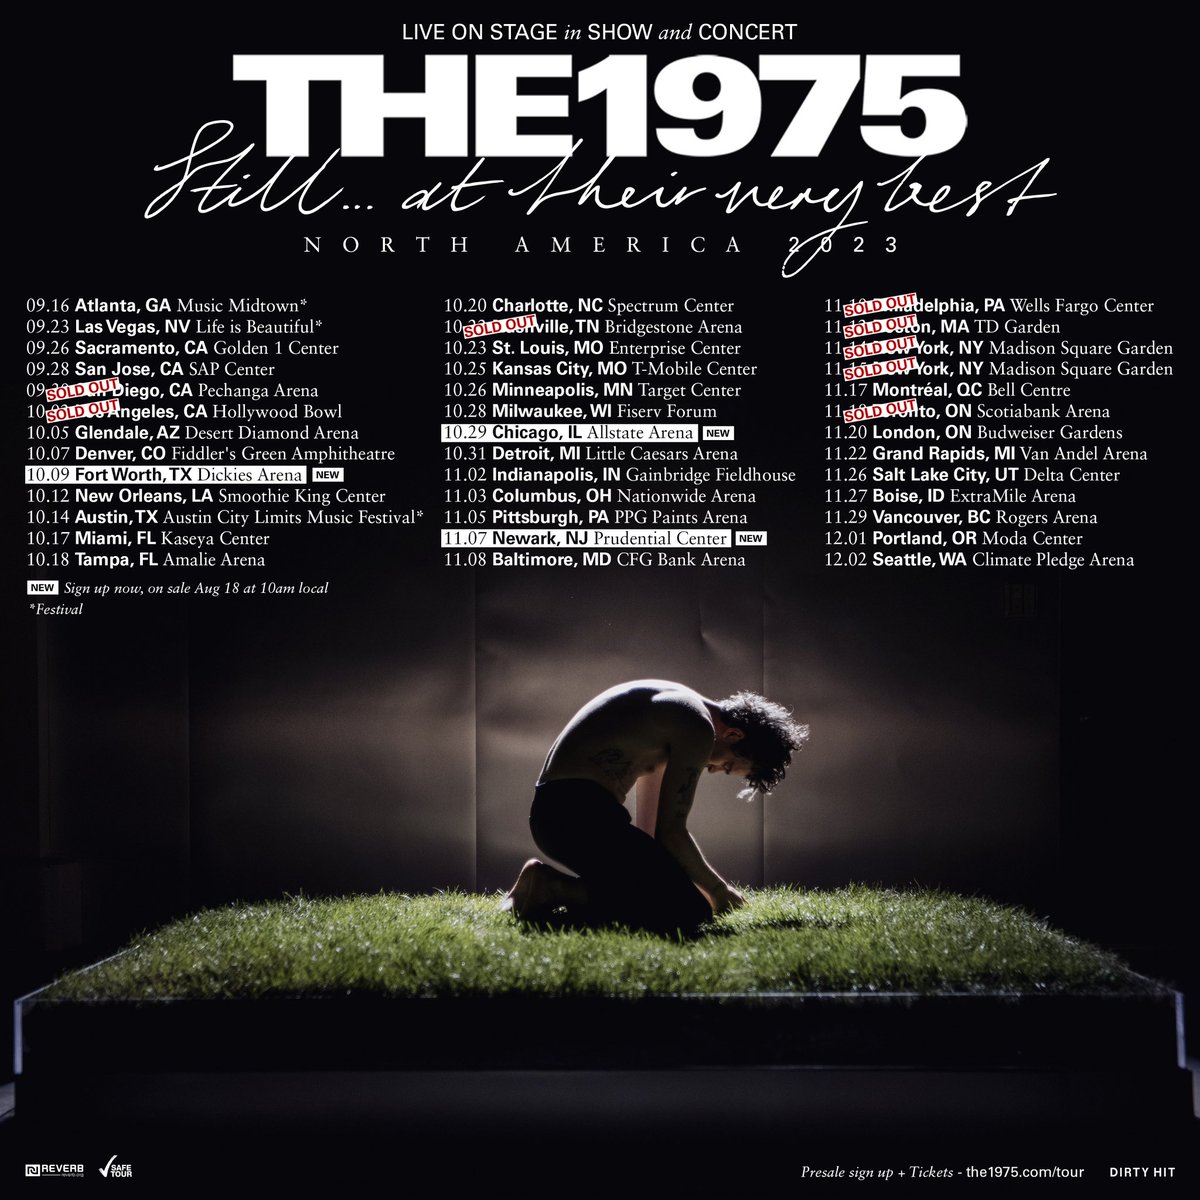 Still... at their very best
North American Tour 2023
New dates added in Fort Worth, Chicago and Newark. 

Ticket pre-sale starts 10am local time today. Register for pre-sale at the1975.com/tour
#The1975